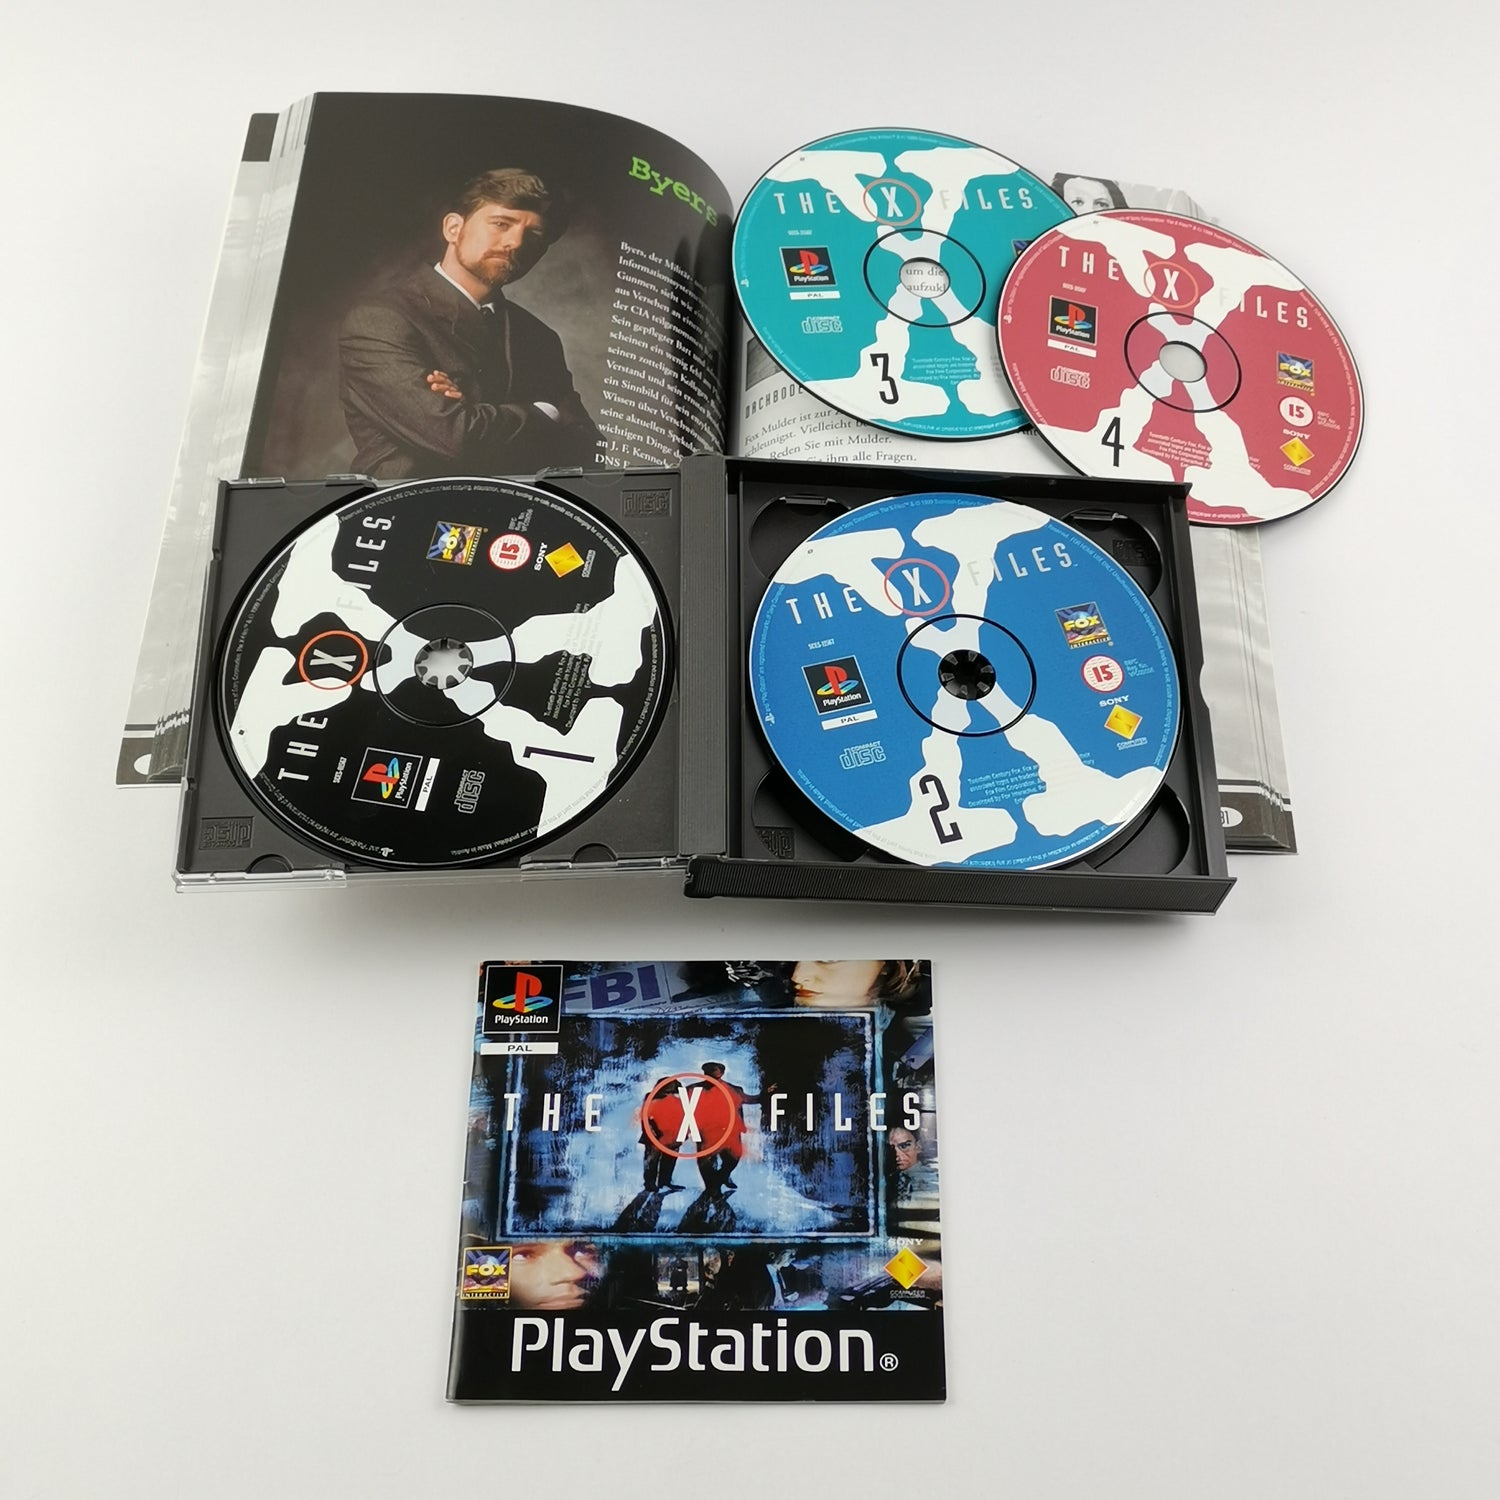 Sony Playstation 1 game: The X Files + Prima's solution book - original packaging instructions PS1